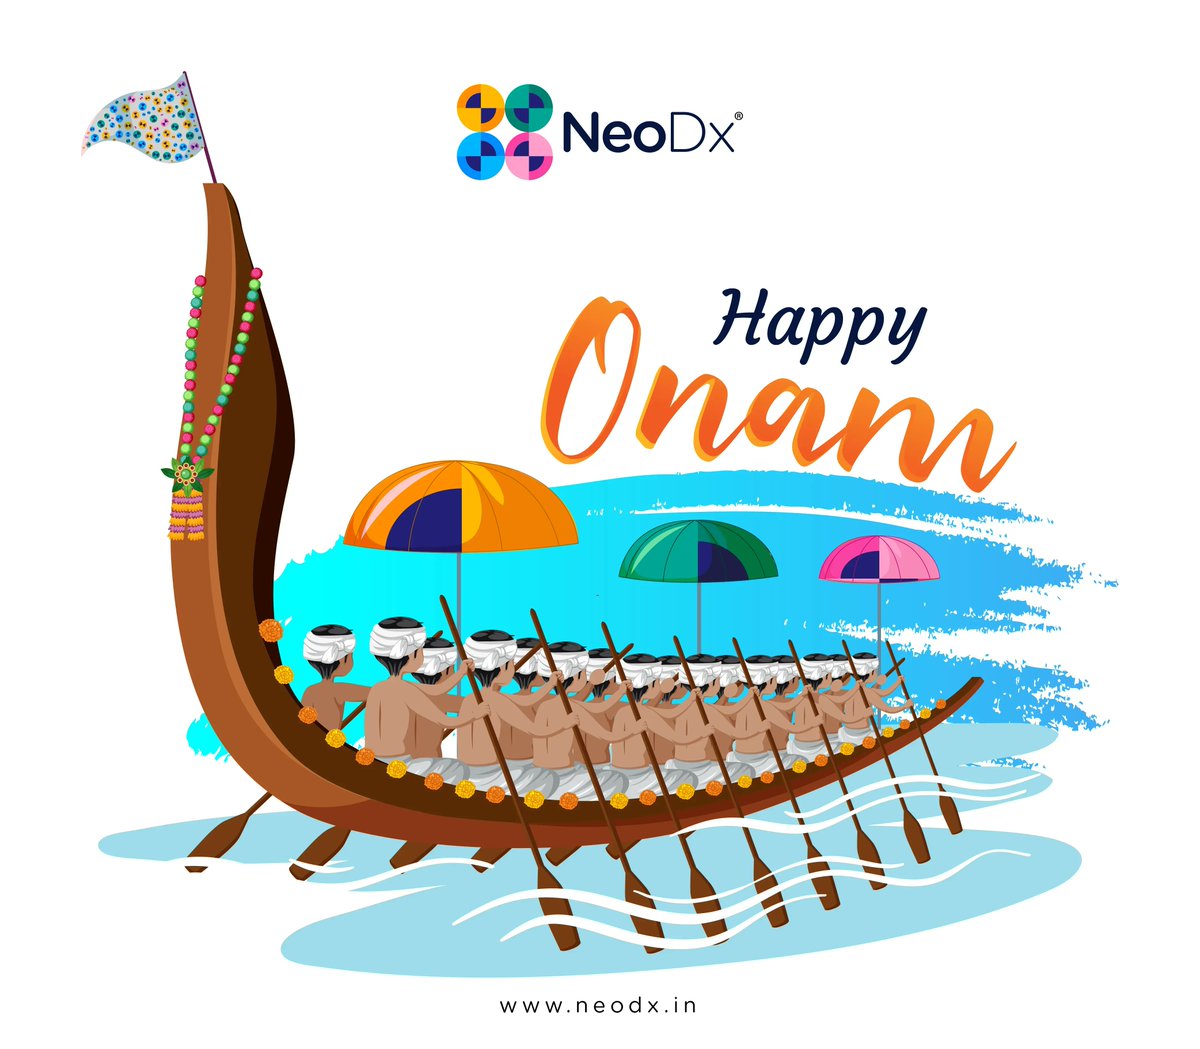 Embracing tradition, and fostering innovation – NeoDx wishes you a joyous Onam! As we celebrate the vibrant festivities of this cherished harvest festival, let us also reflect on the values that unite us. #onam#festival#vibes#celebrations#tradition#keralaspecial#keralacuisine